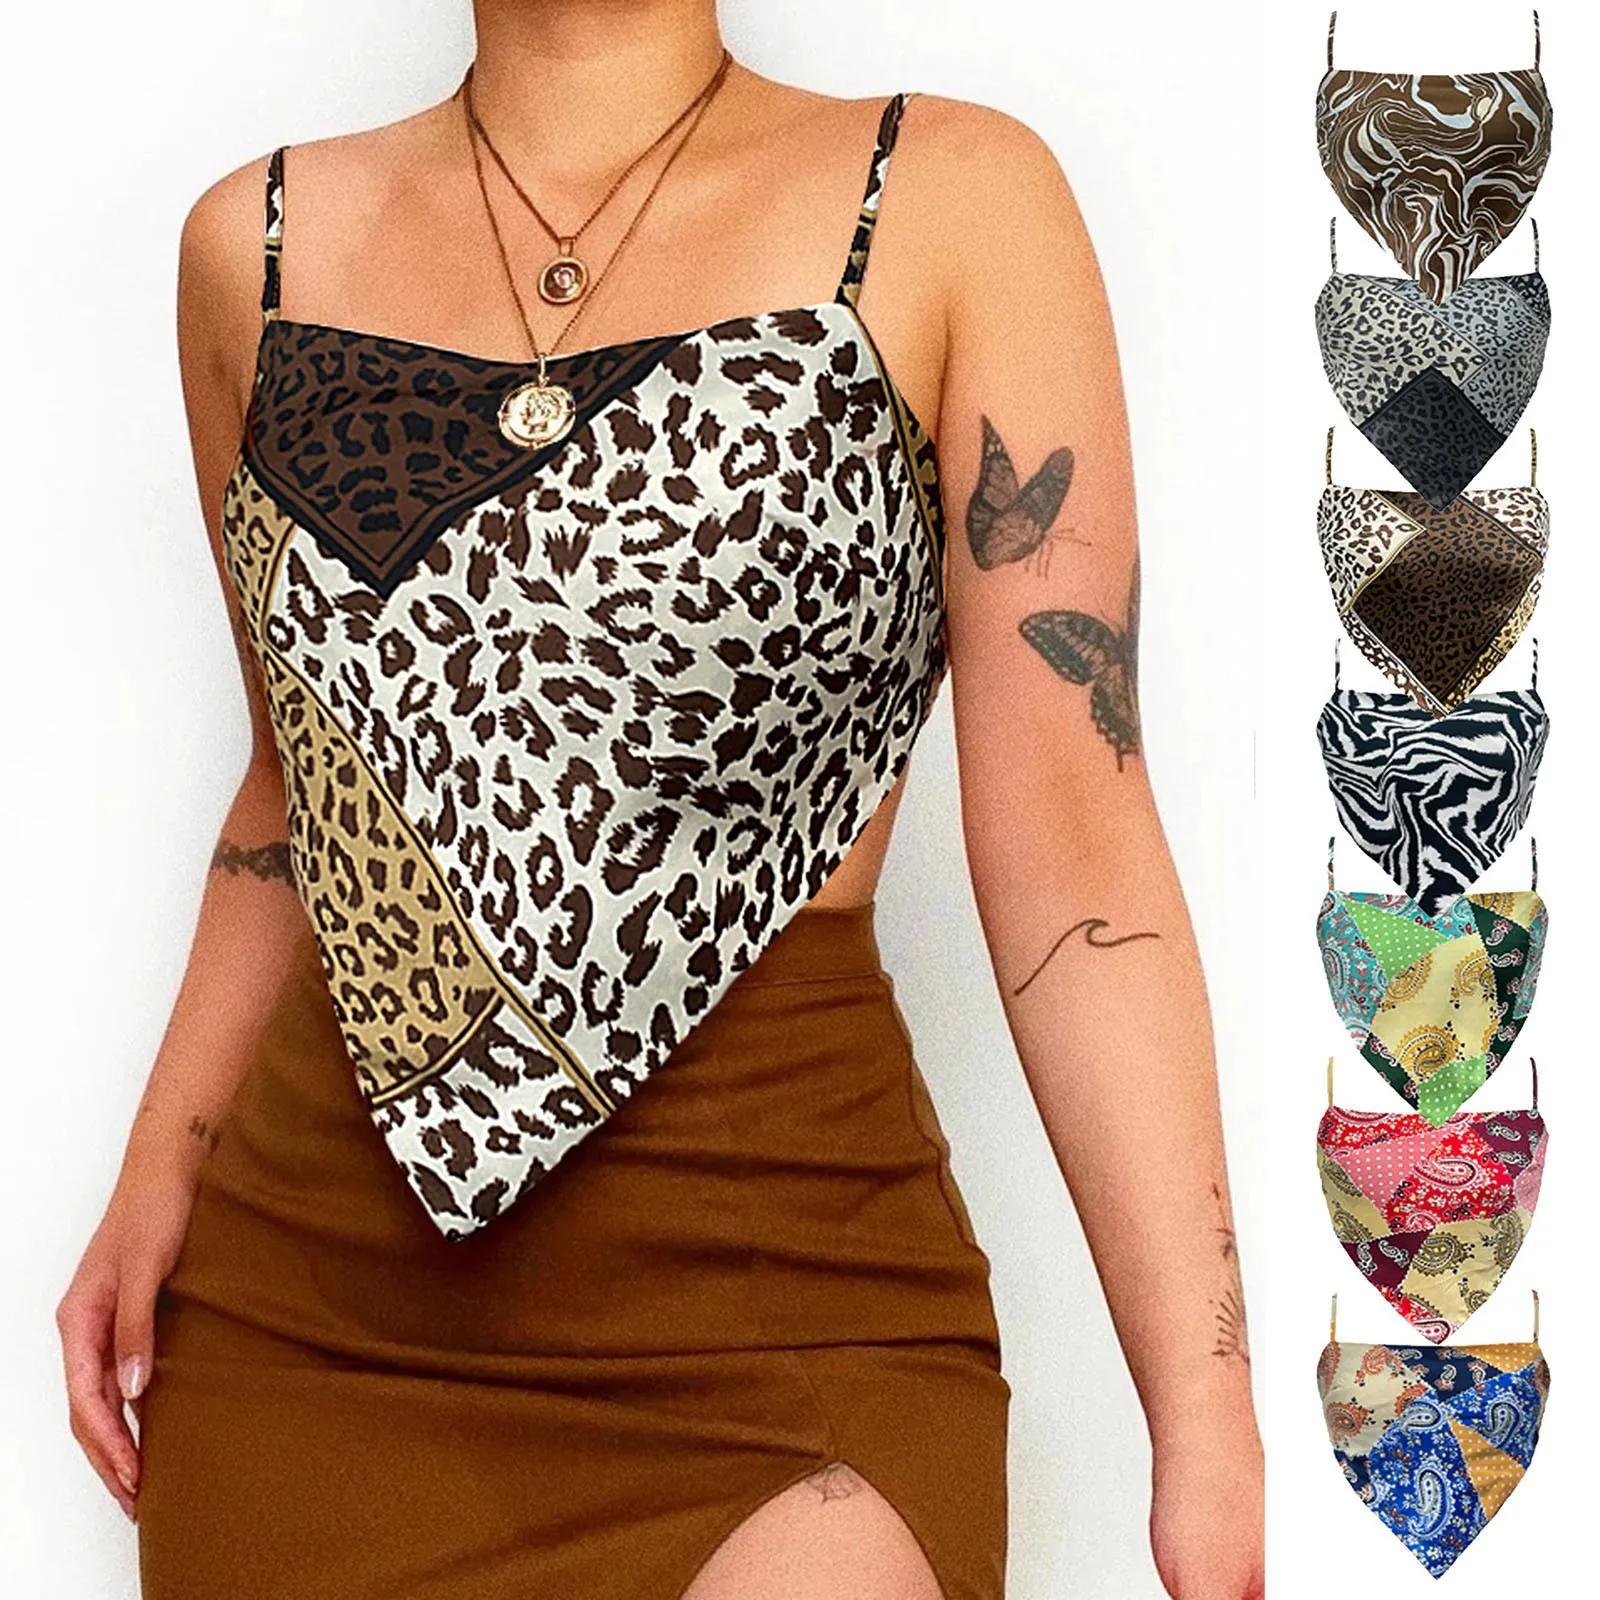 

Y2k Cami Crop Top Women Backless Leopard Print Navel Wrap Breast Sleeveless Camisole Vest Top Spaghetti Strap Crisscross Camis